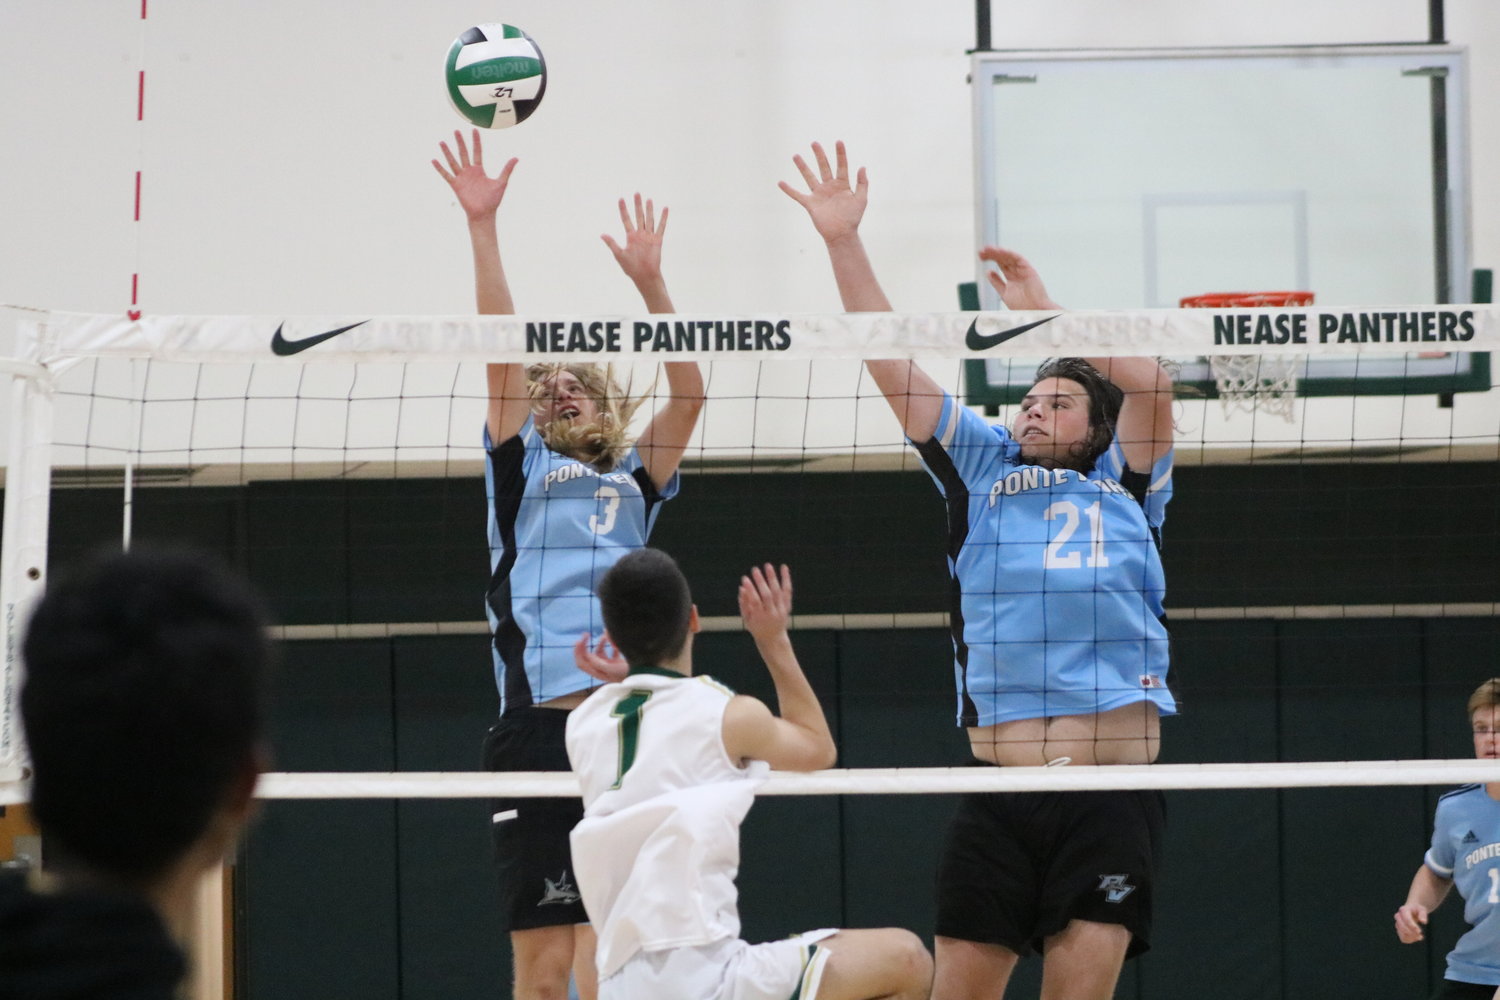 After winning the first set, the Sharks lost to the Panthers in four sets.